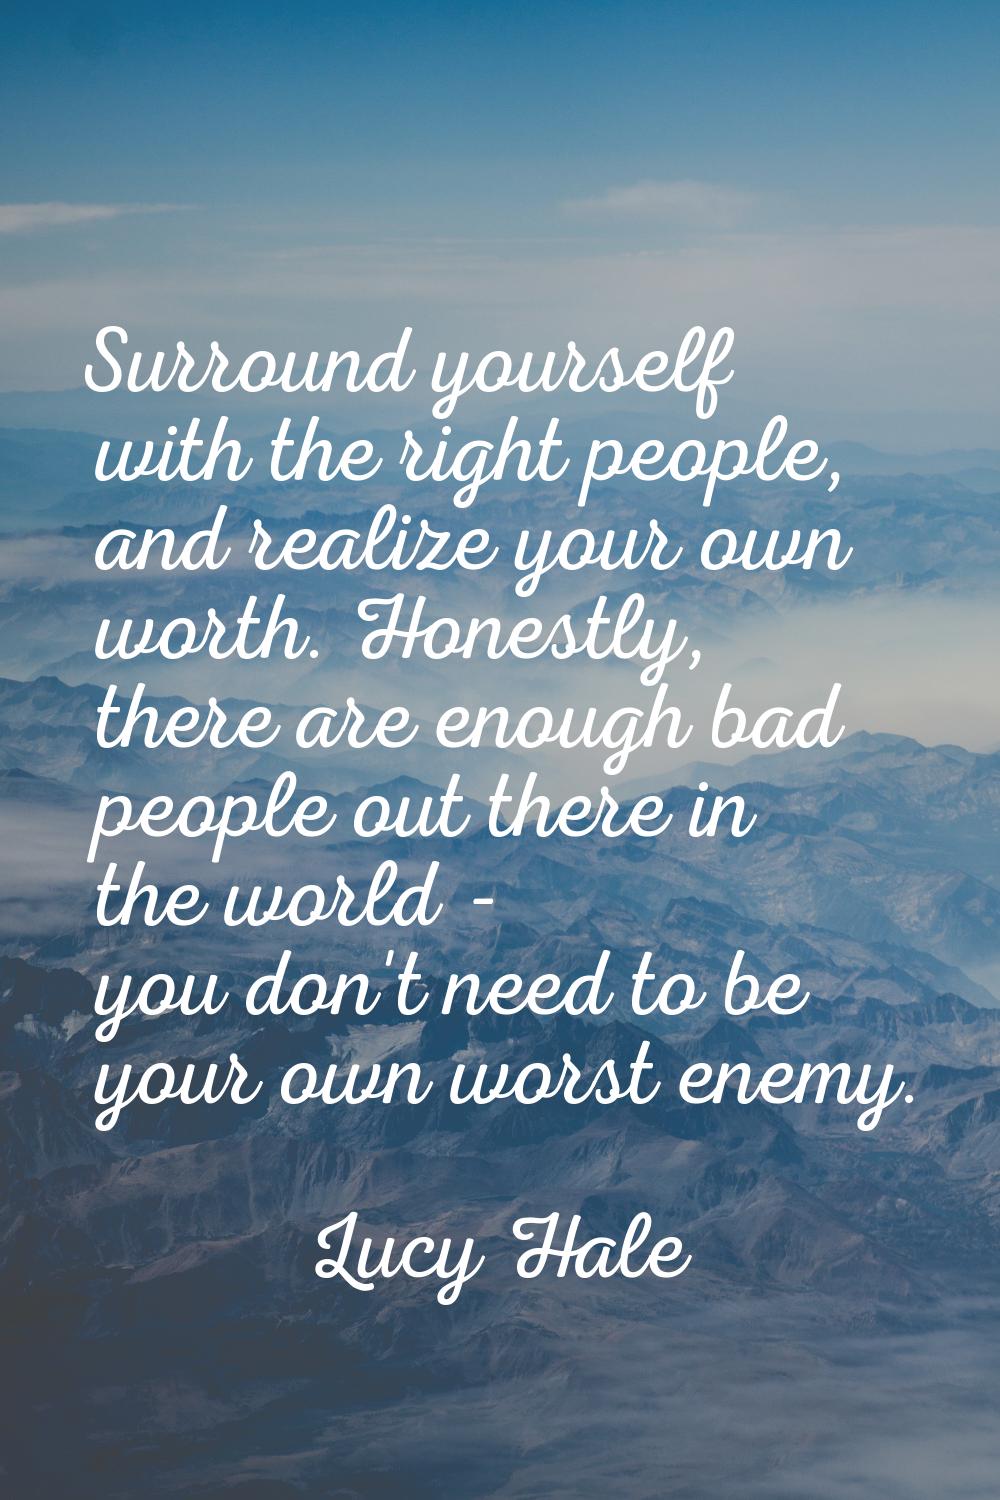 Surround yourself with the right people, and realize your own worth. Honestly, there are enough bad